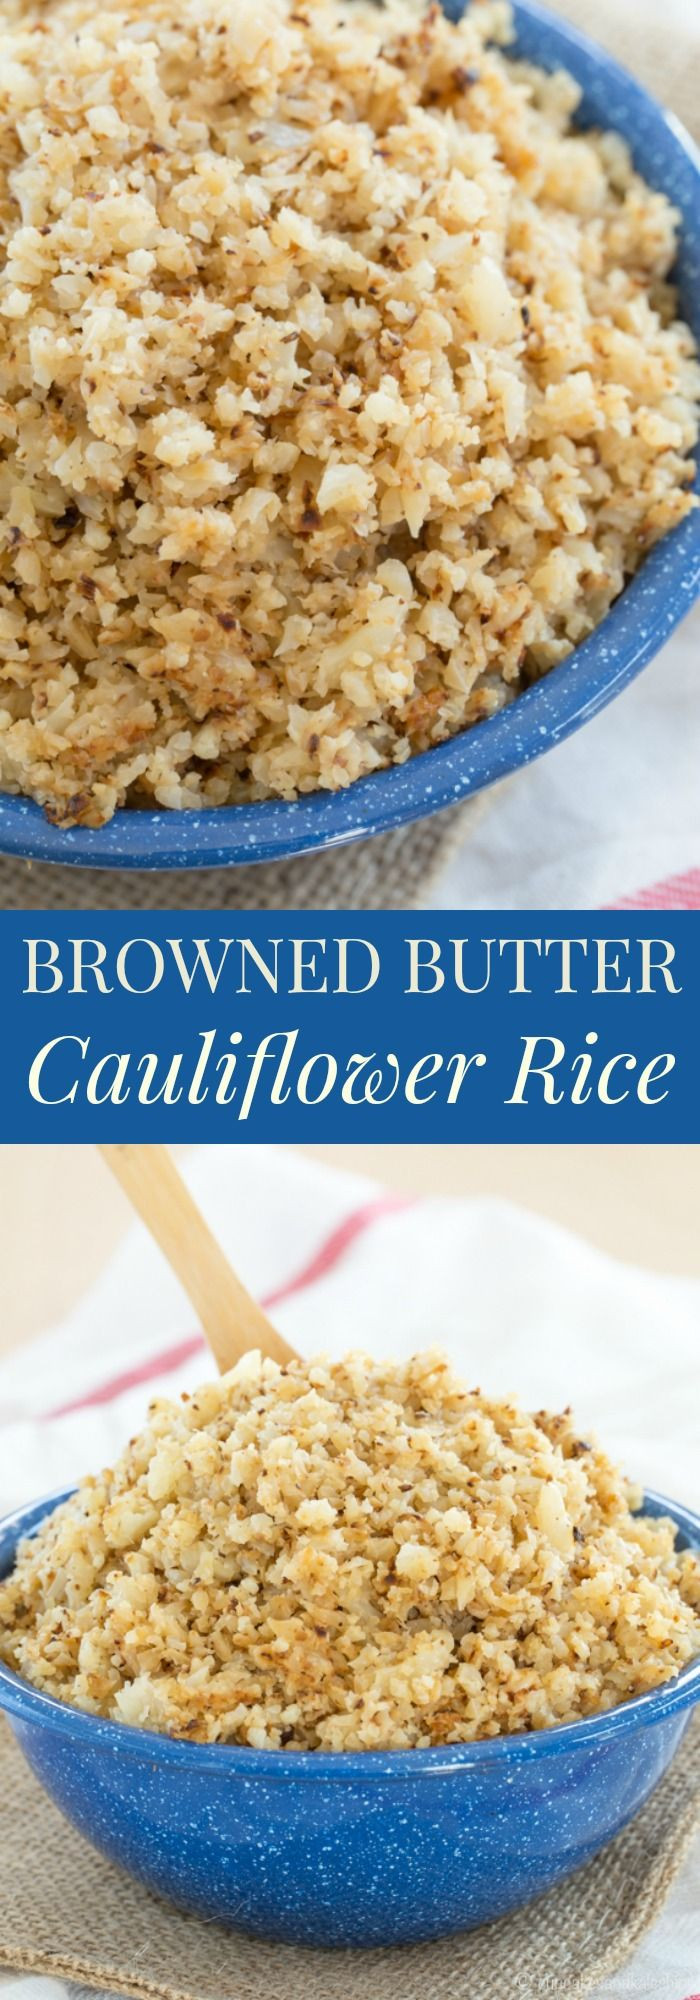 Is Brown Rice Low Carb
 284 best Paleo Whole 30 images on Pinterest